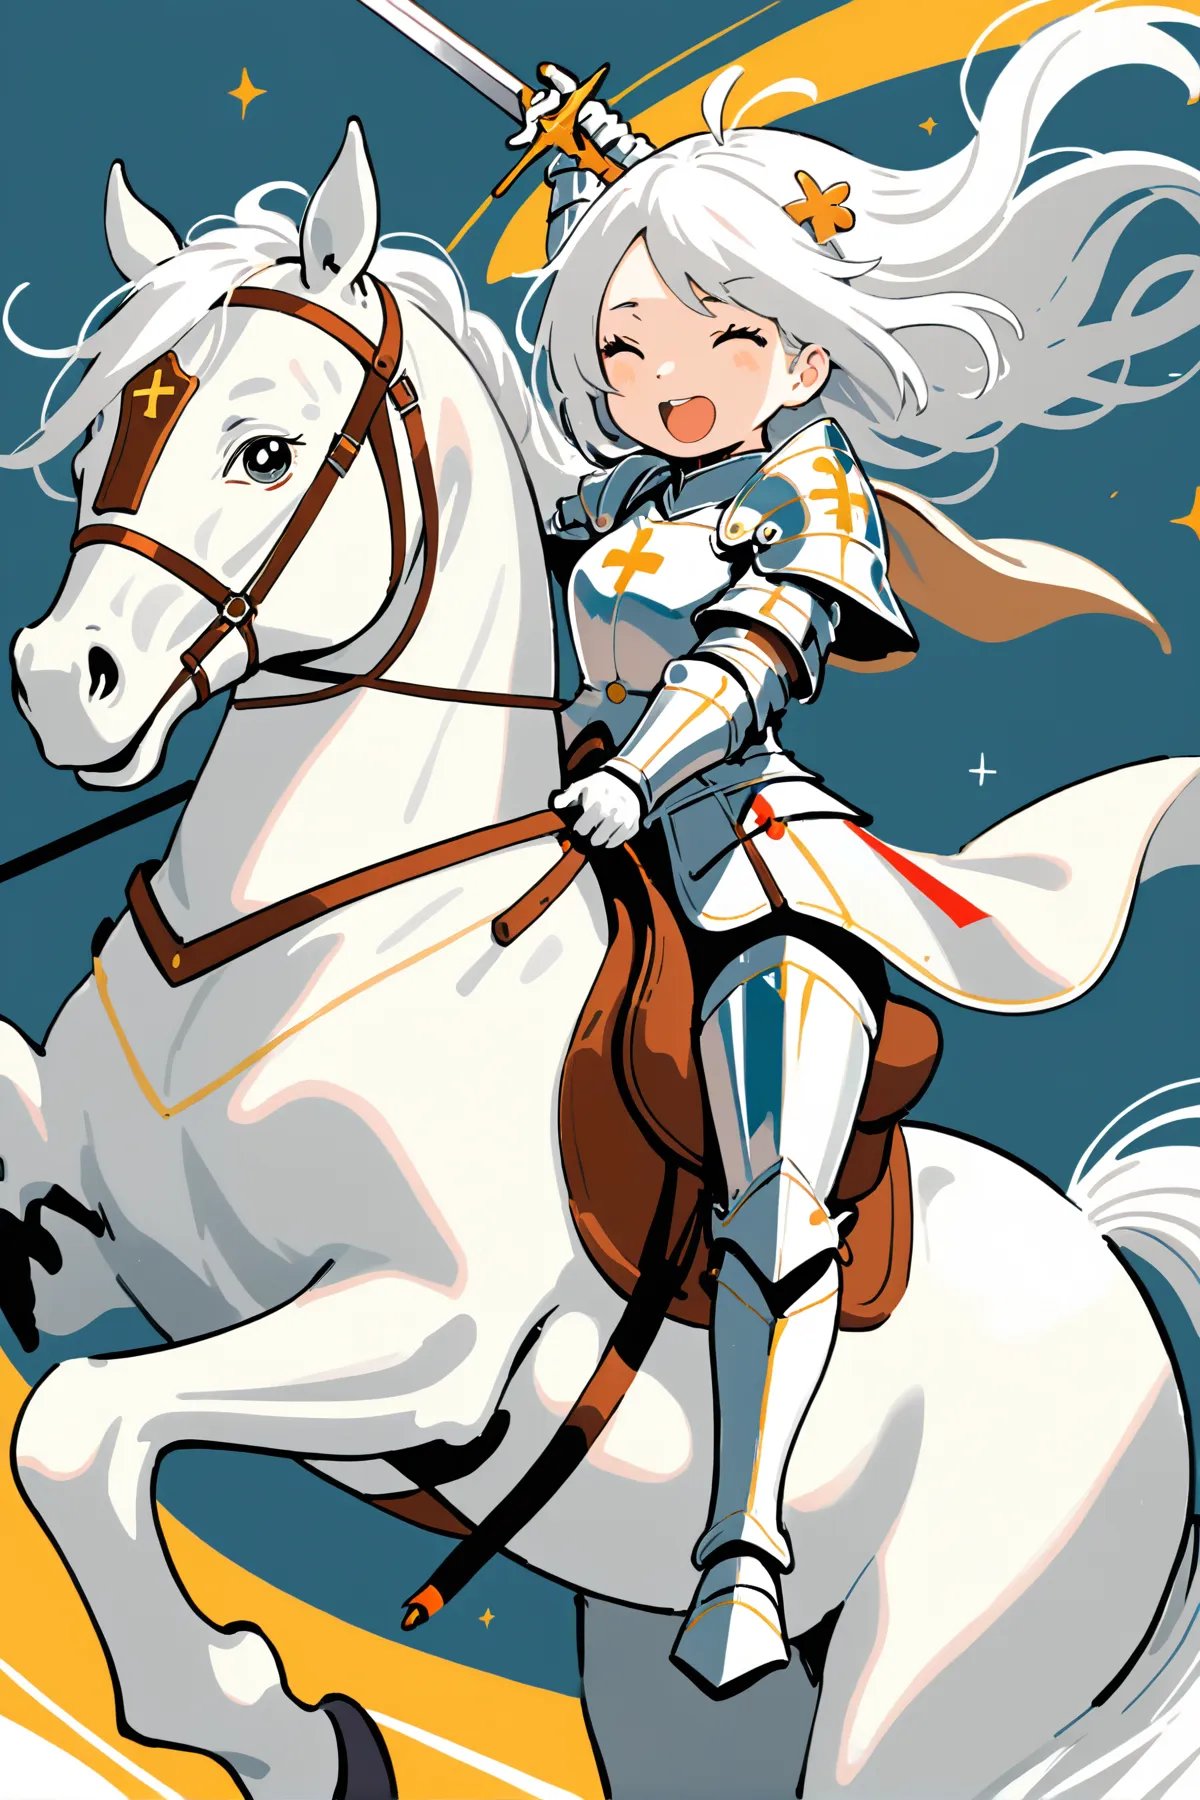 Illustration of a female knight riding a white horse with a joyful expression, holding a shining sword high in the air as the wind whips through her hair and the iconic Miffy character, wearing a tiny suit of armor, sits on the horse’s back looking determined and brave.